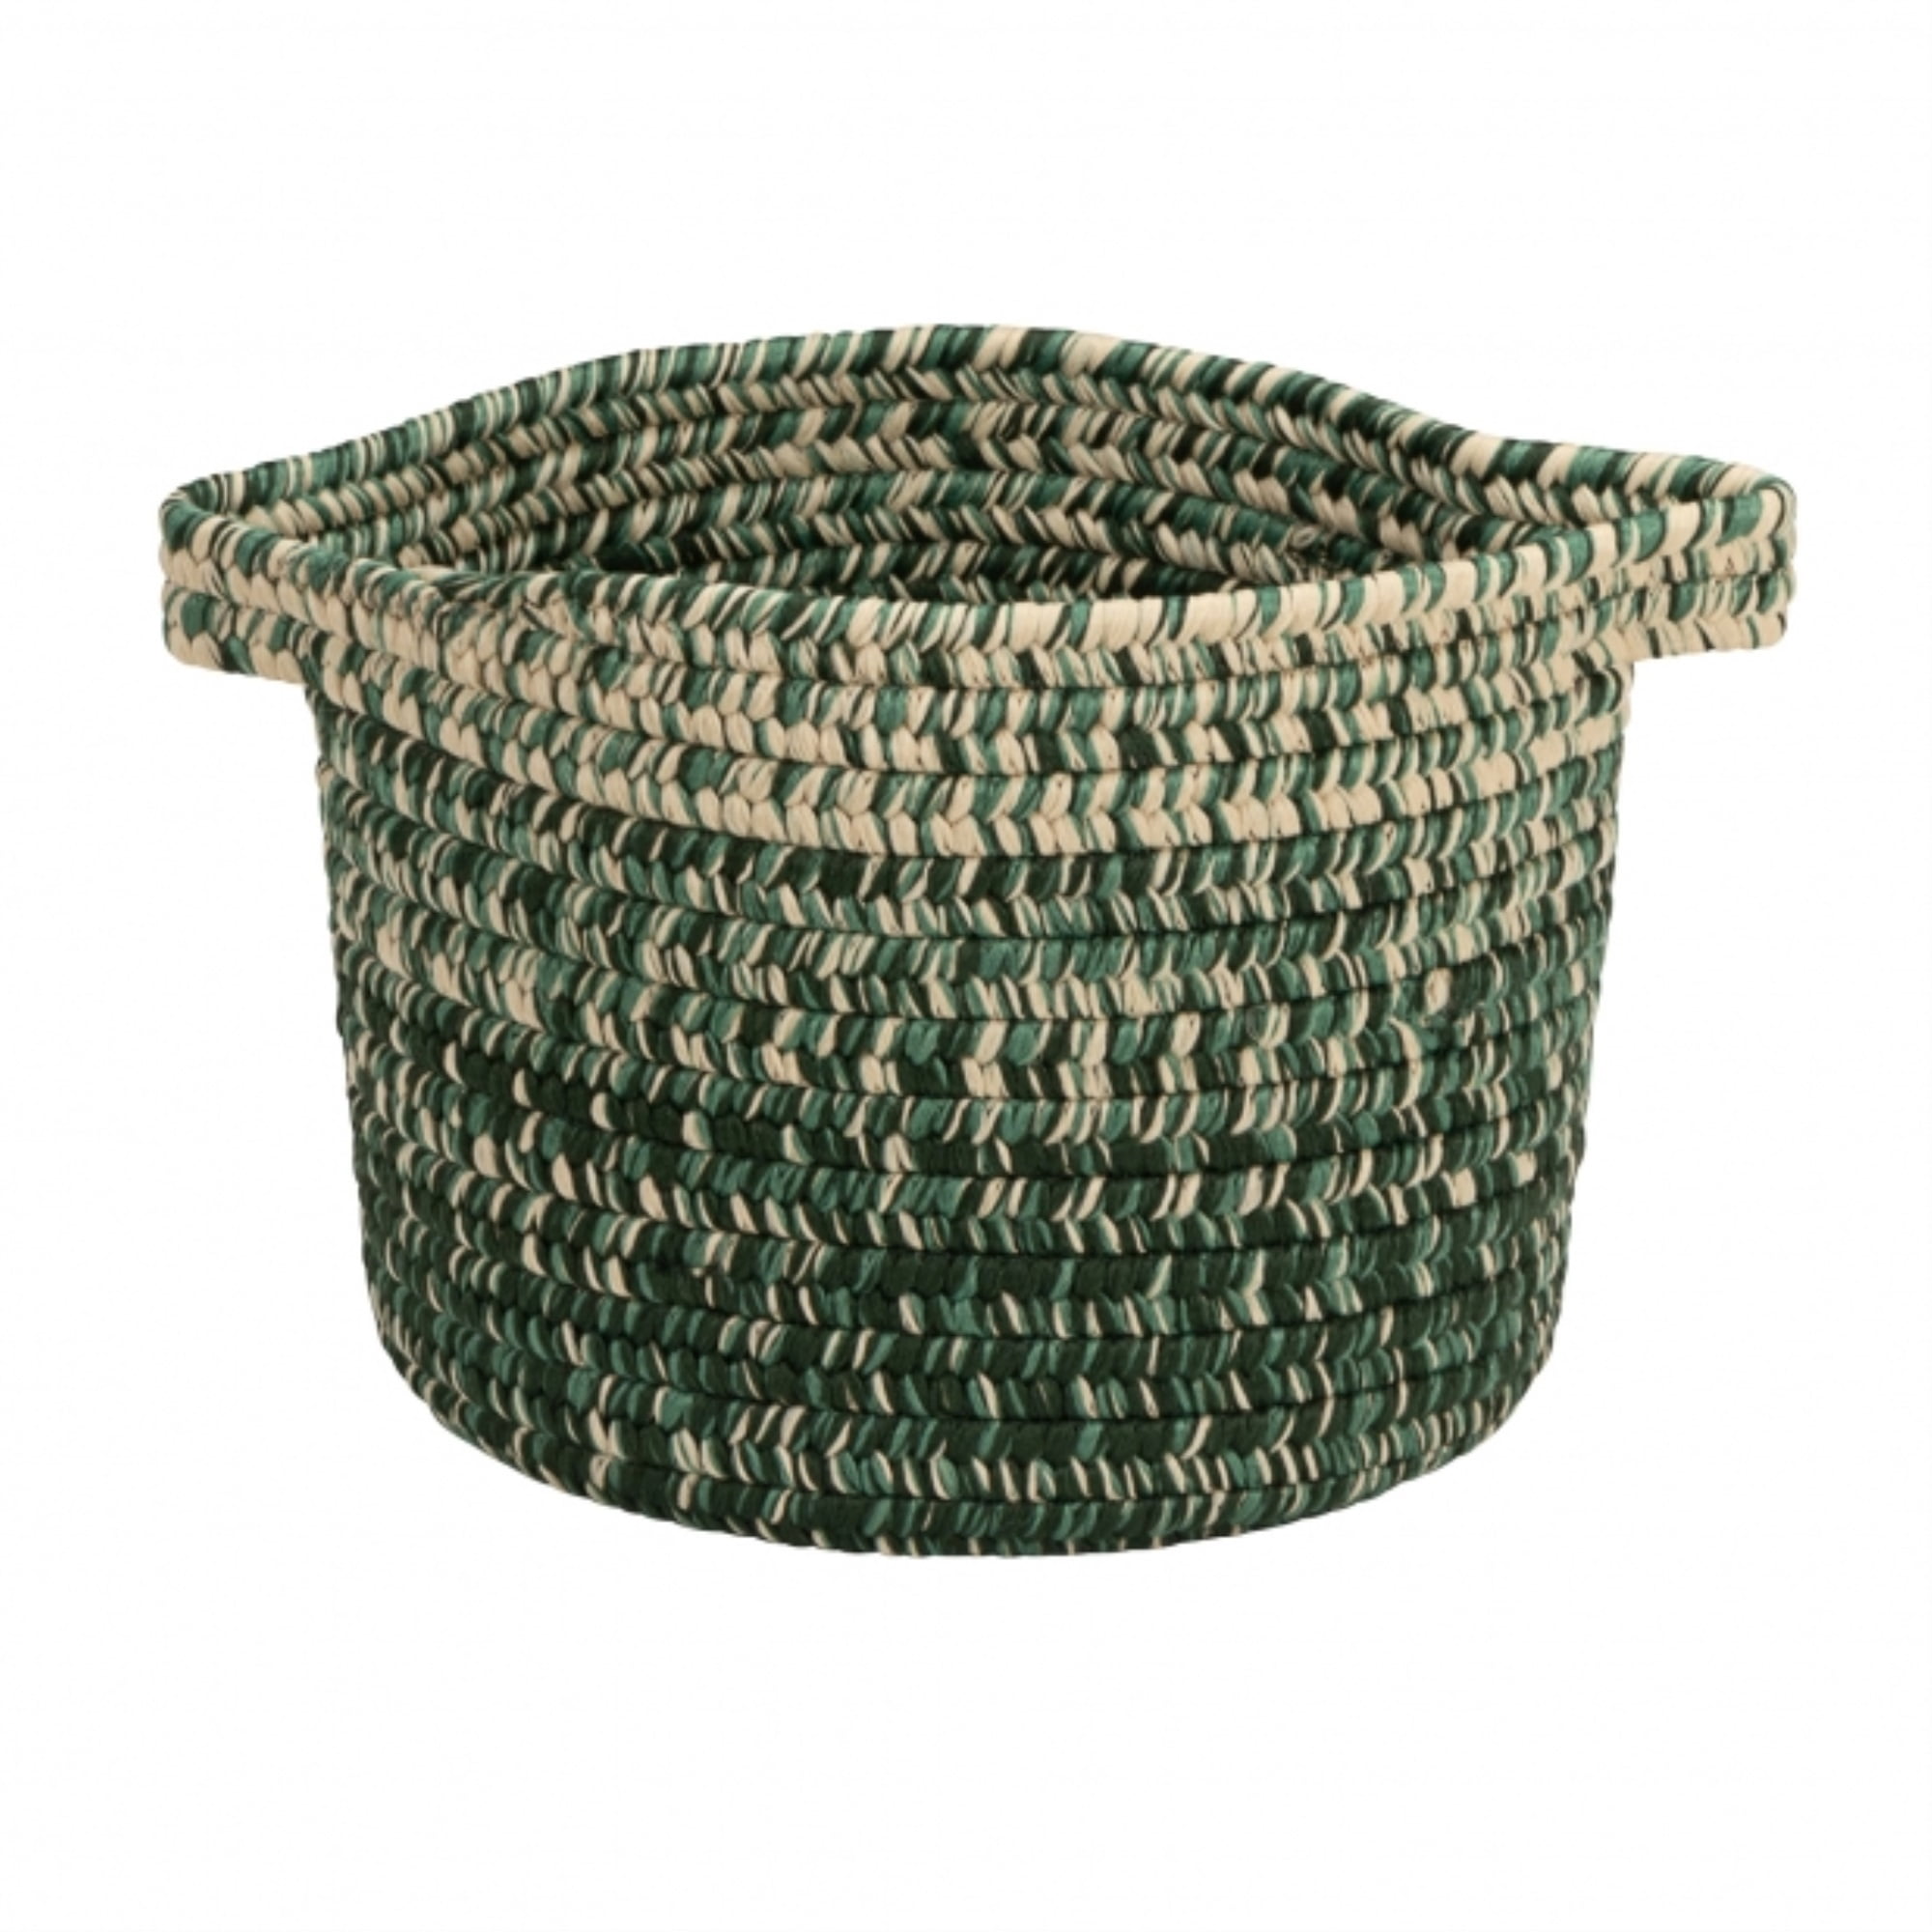 Colonia Mills Mo89 Monet Ombre Basket, Green - 16 X 16 X 20 In.